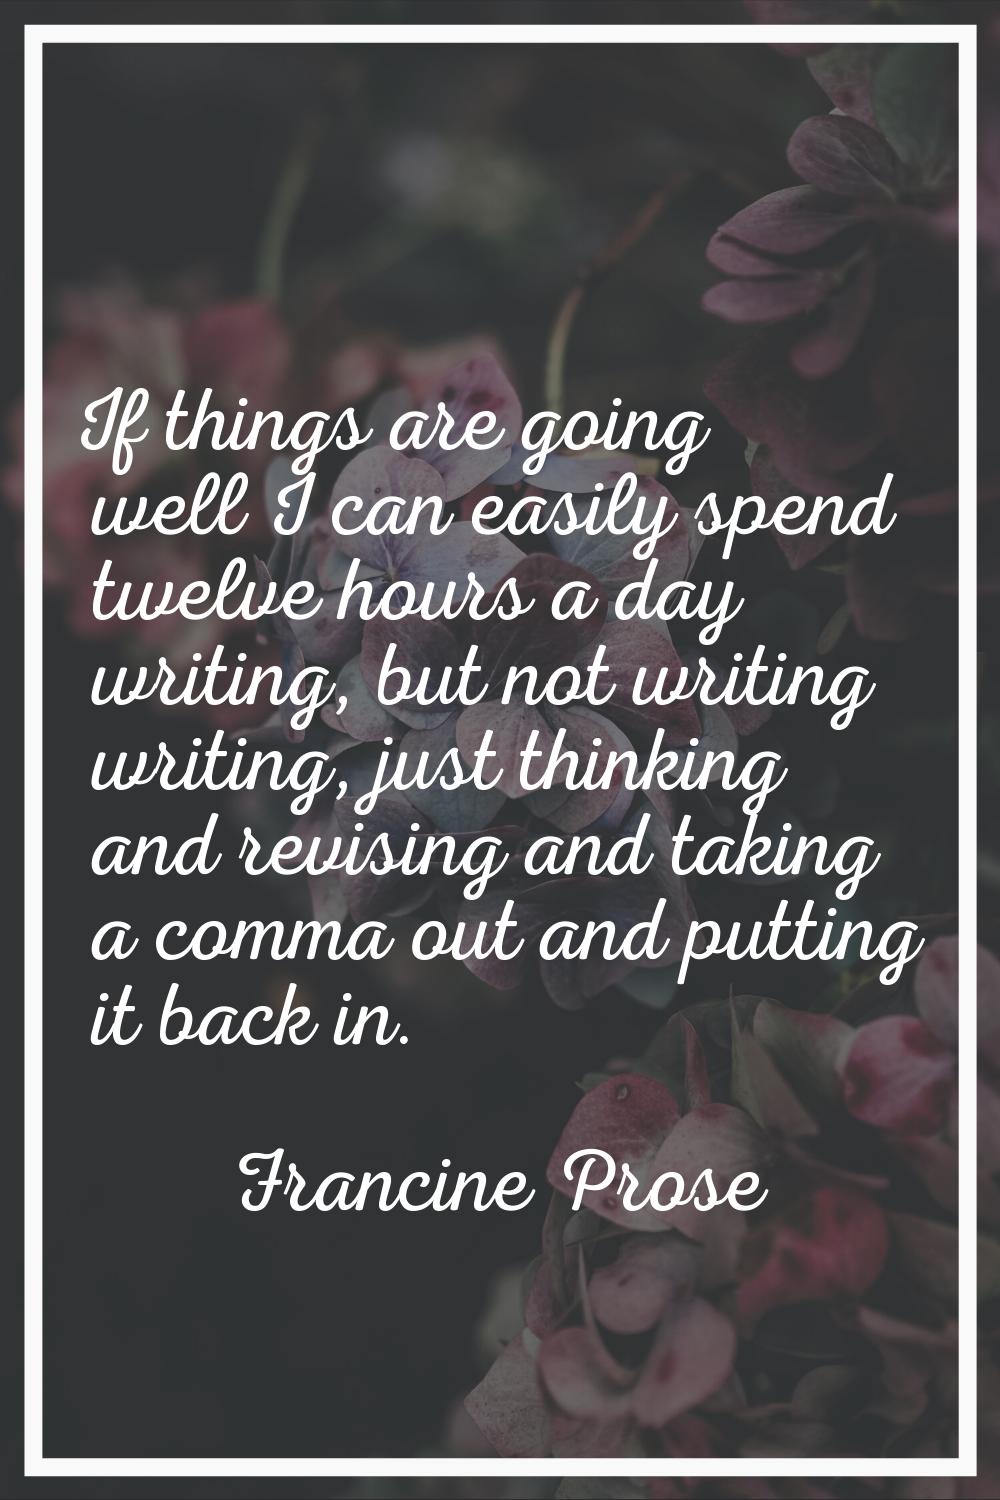 If things are going well I can easily spend twelve hours a day writing, but not writing writing, ju